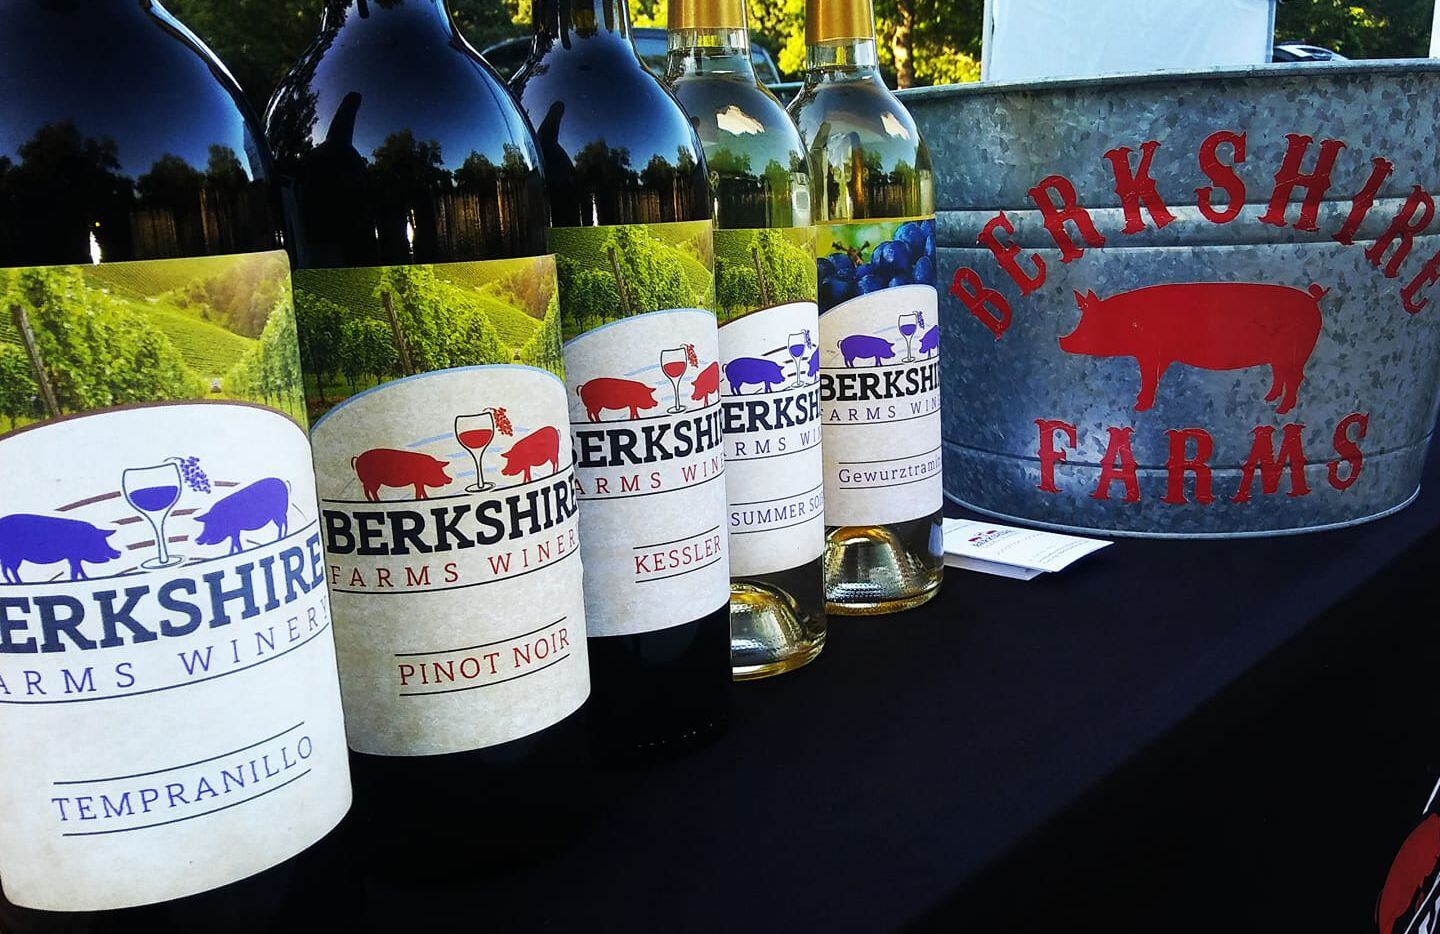 Dallas-based farmers and brothers, Jonathan and Jason Jackson, own Berkshire Farms and Berkshire Farms Winery.